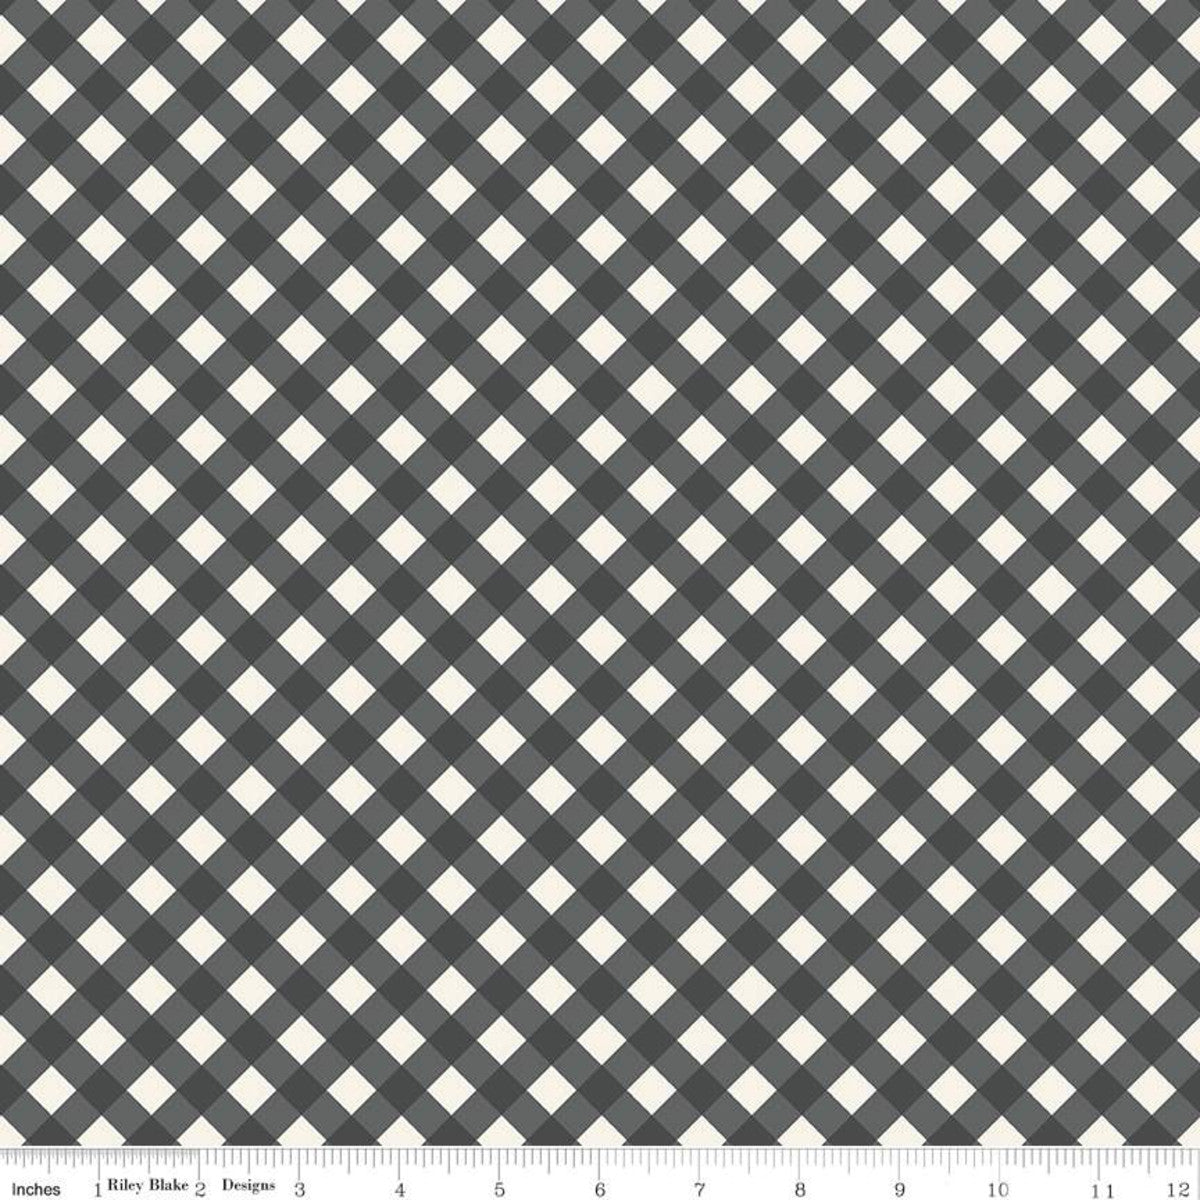 Gingham Garden Check in Charcoal - Weave & Woven